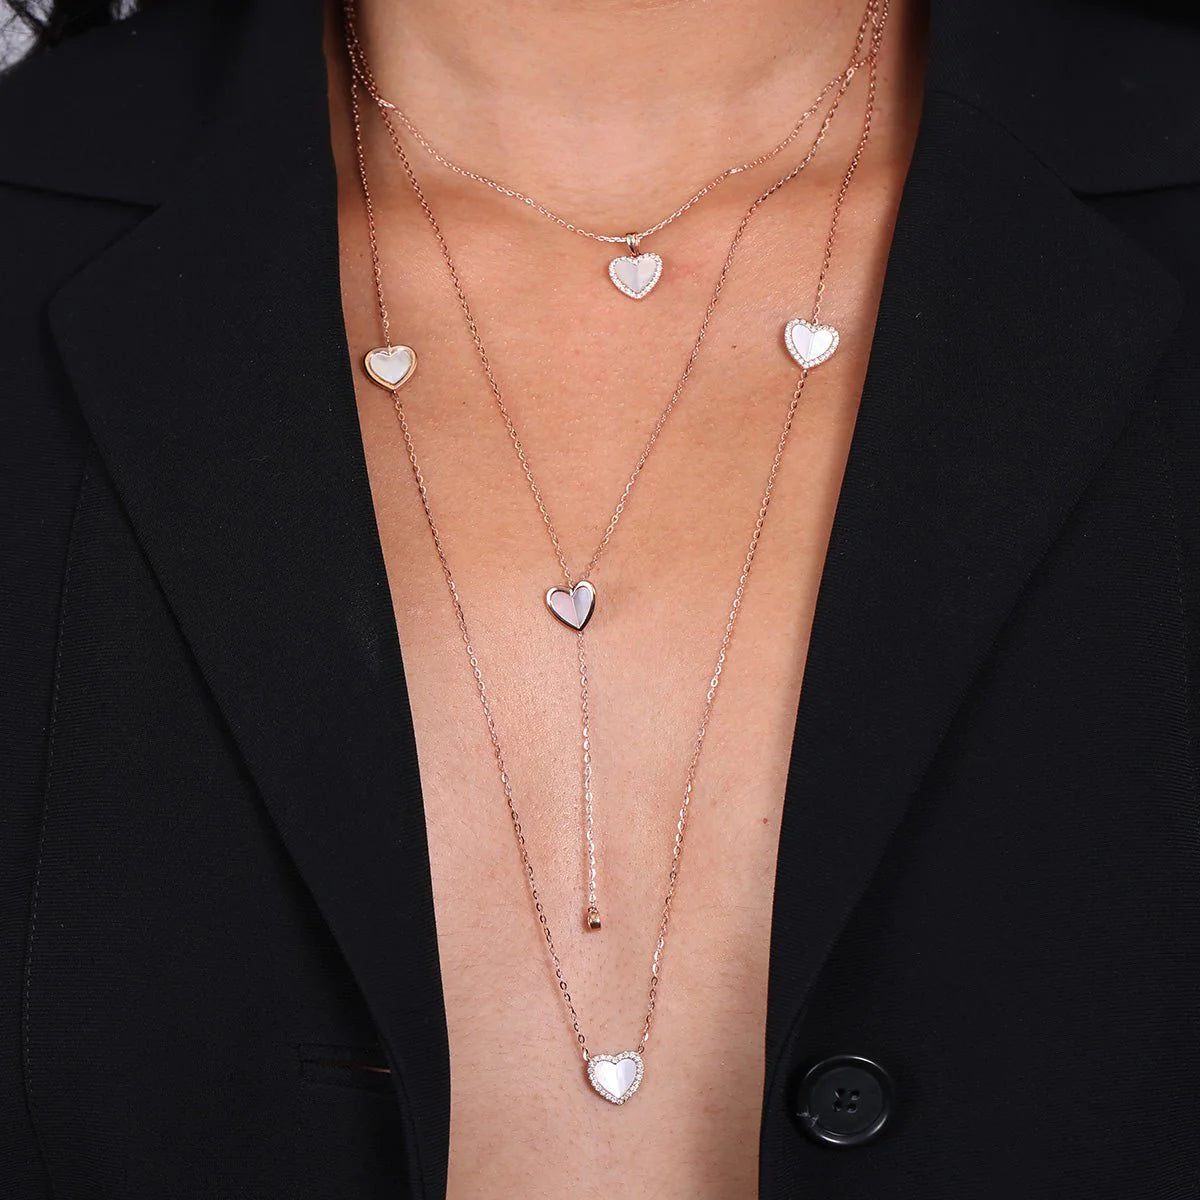 A woman wearing the Mother of Pearl Heart with Diamond Halo Pendant Necklace